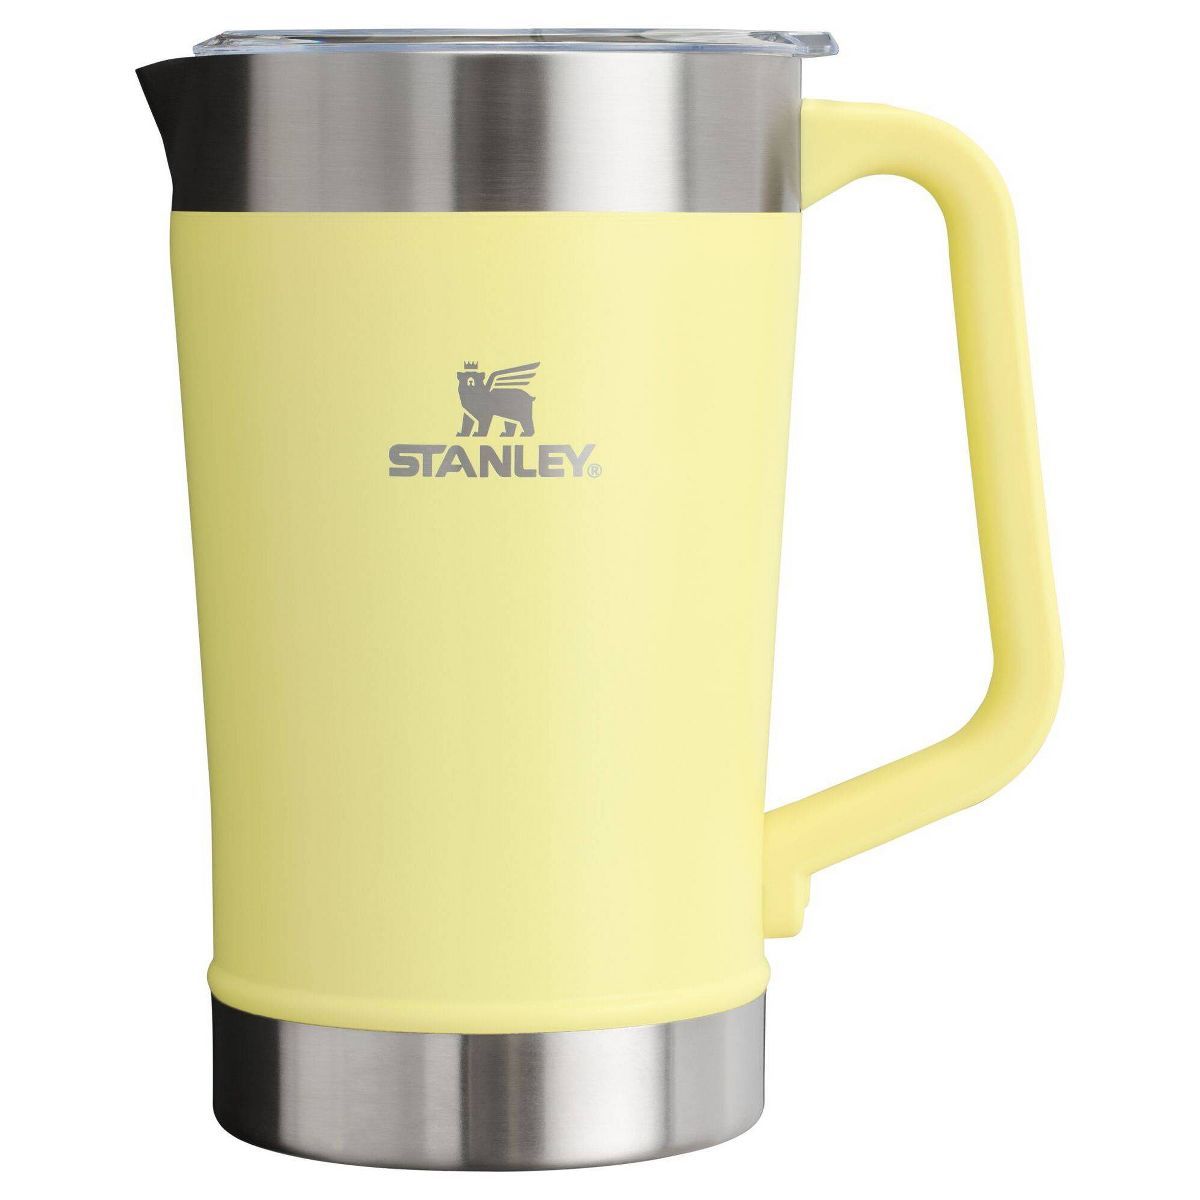 Stanley 64 oz Stainless Steel Stay-Chill Pitcher Sunshine | Target